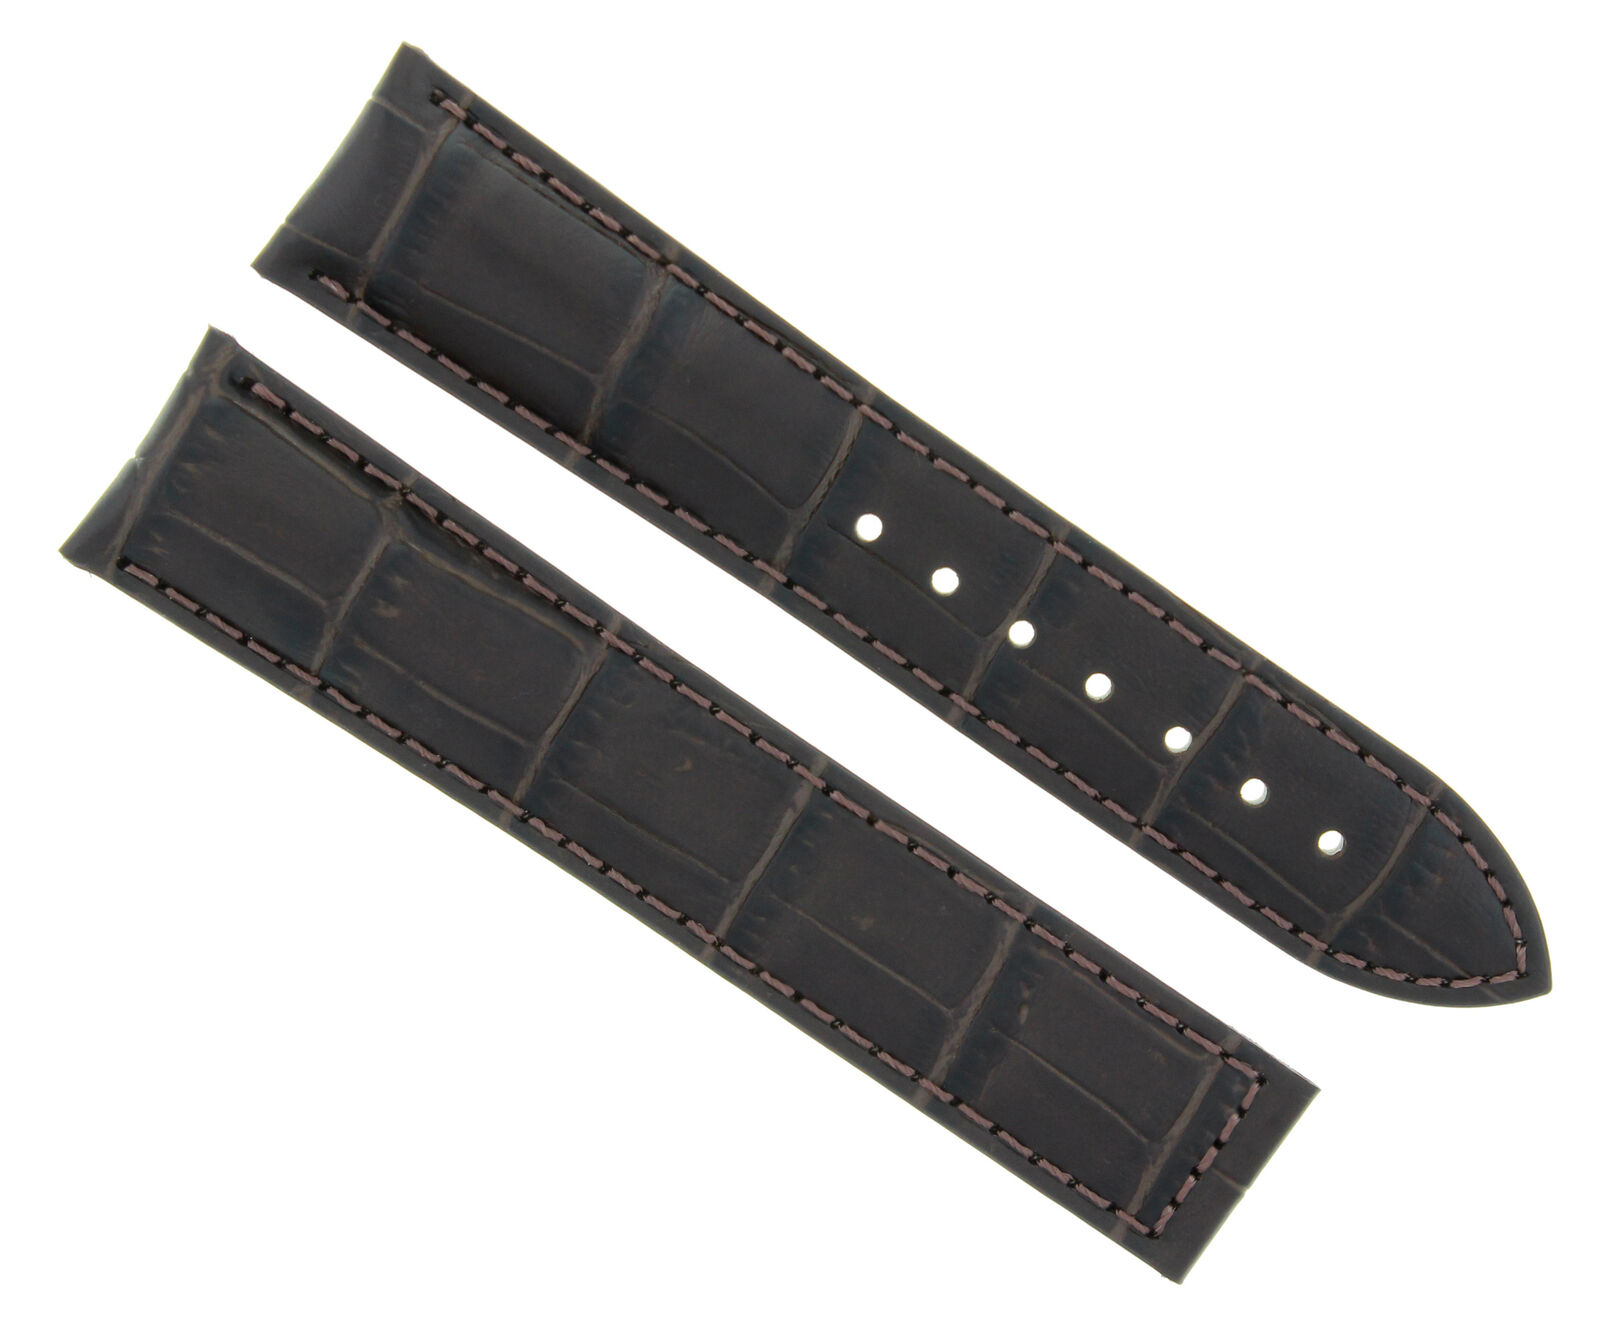 18MM LEATHER WATCH STRAP BAND FOR OMEGA SEAMASTER  DEPLOYMENT CLASP DARK BROWN